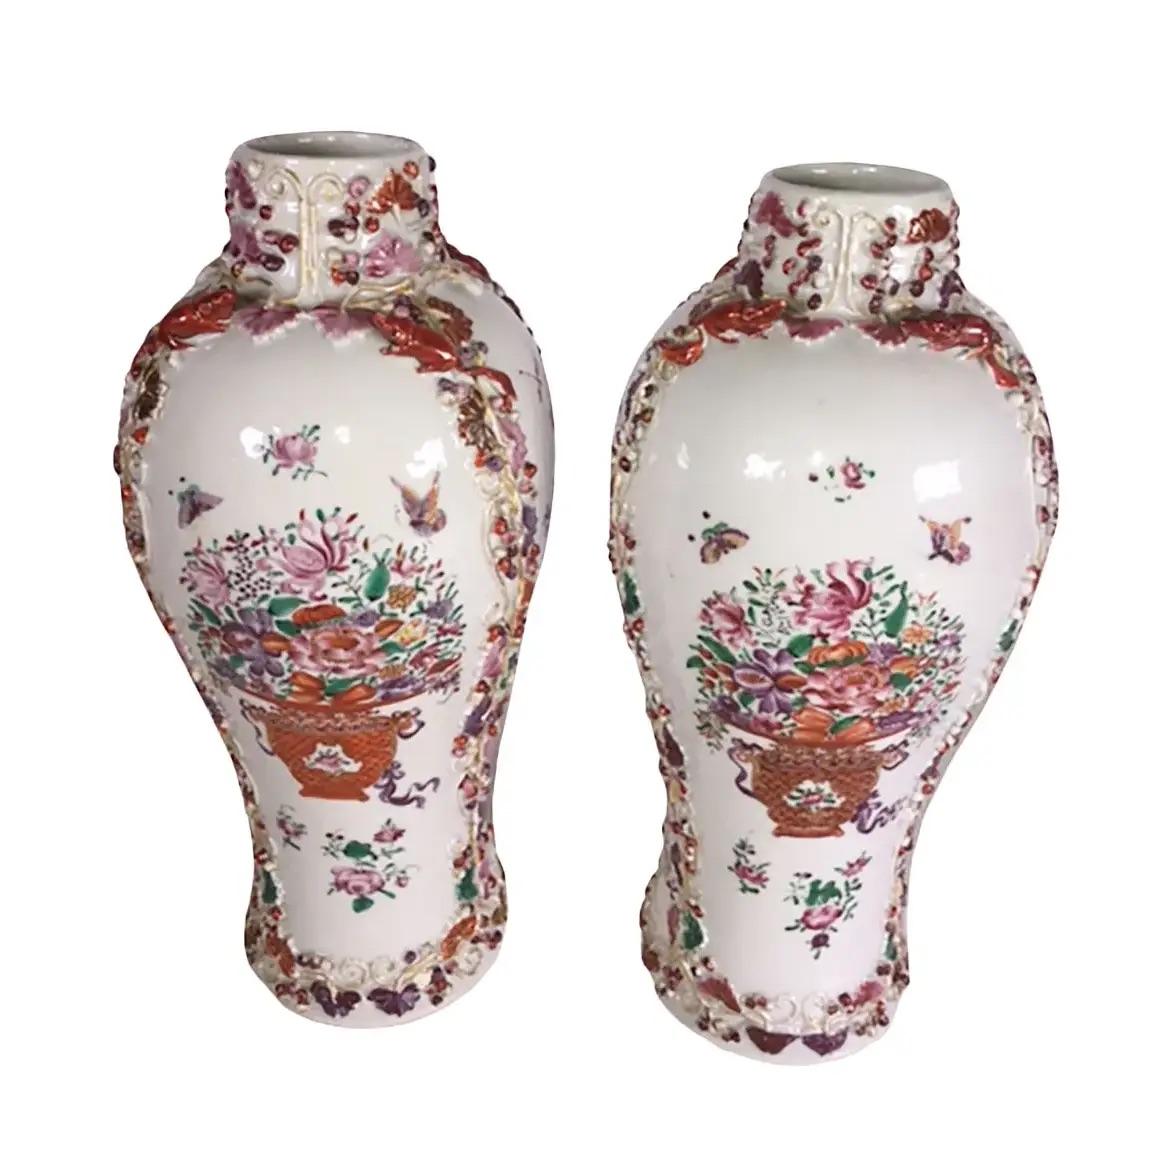 Chinese Export Porcelain Vases with Mice, a Pair For Sale 4